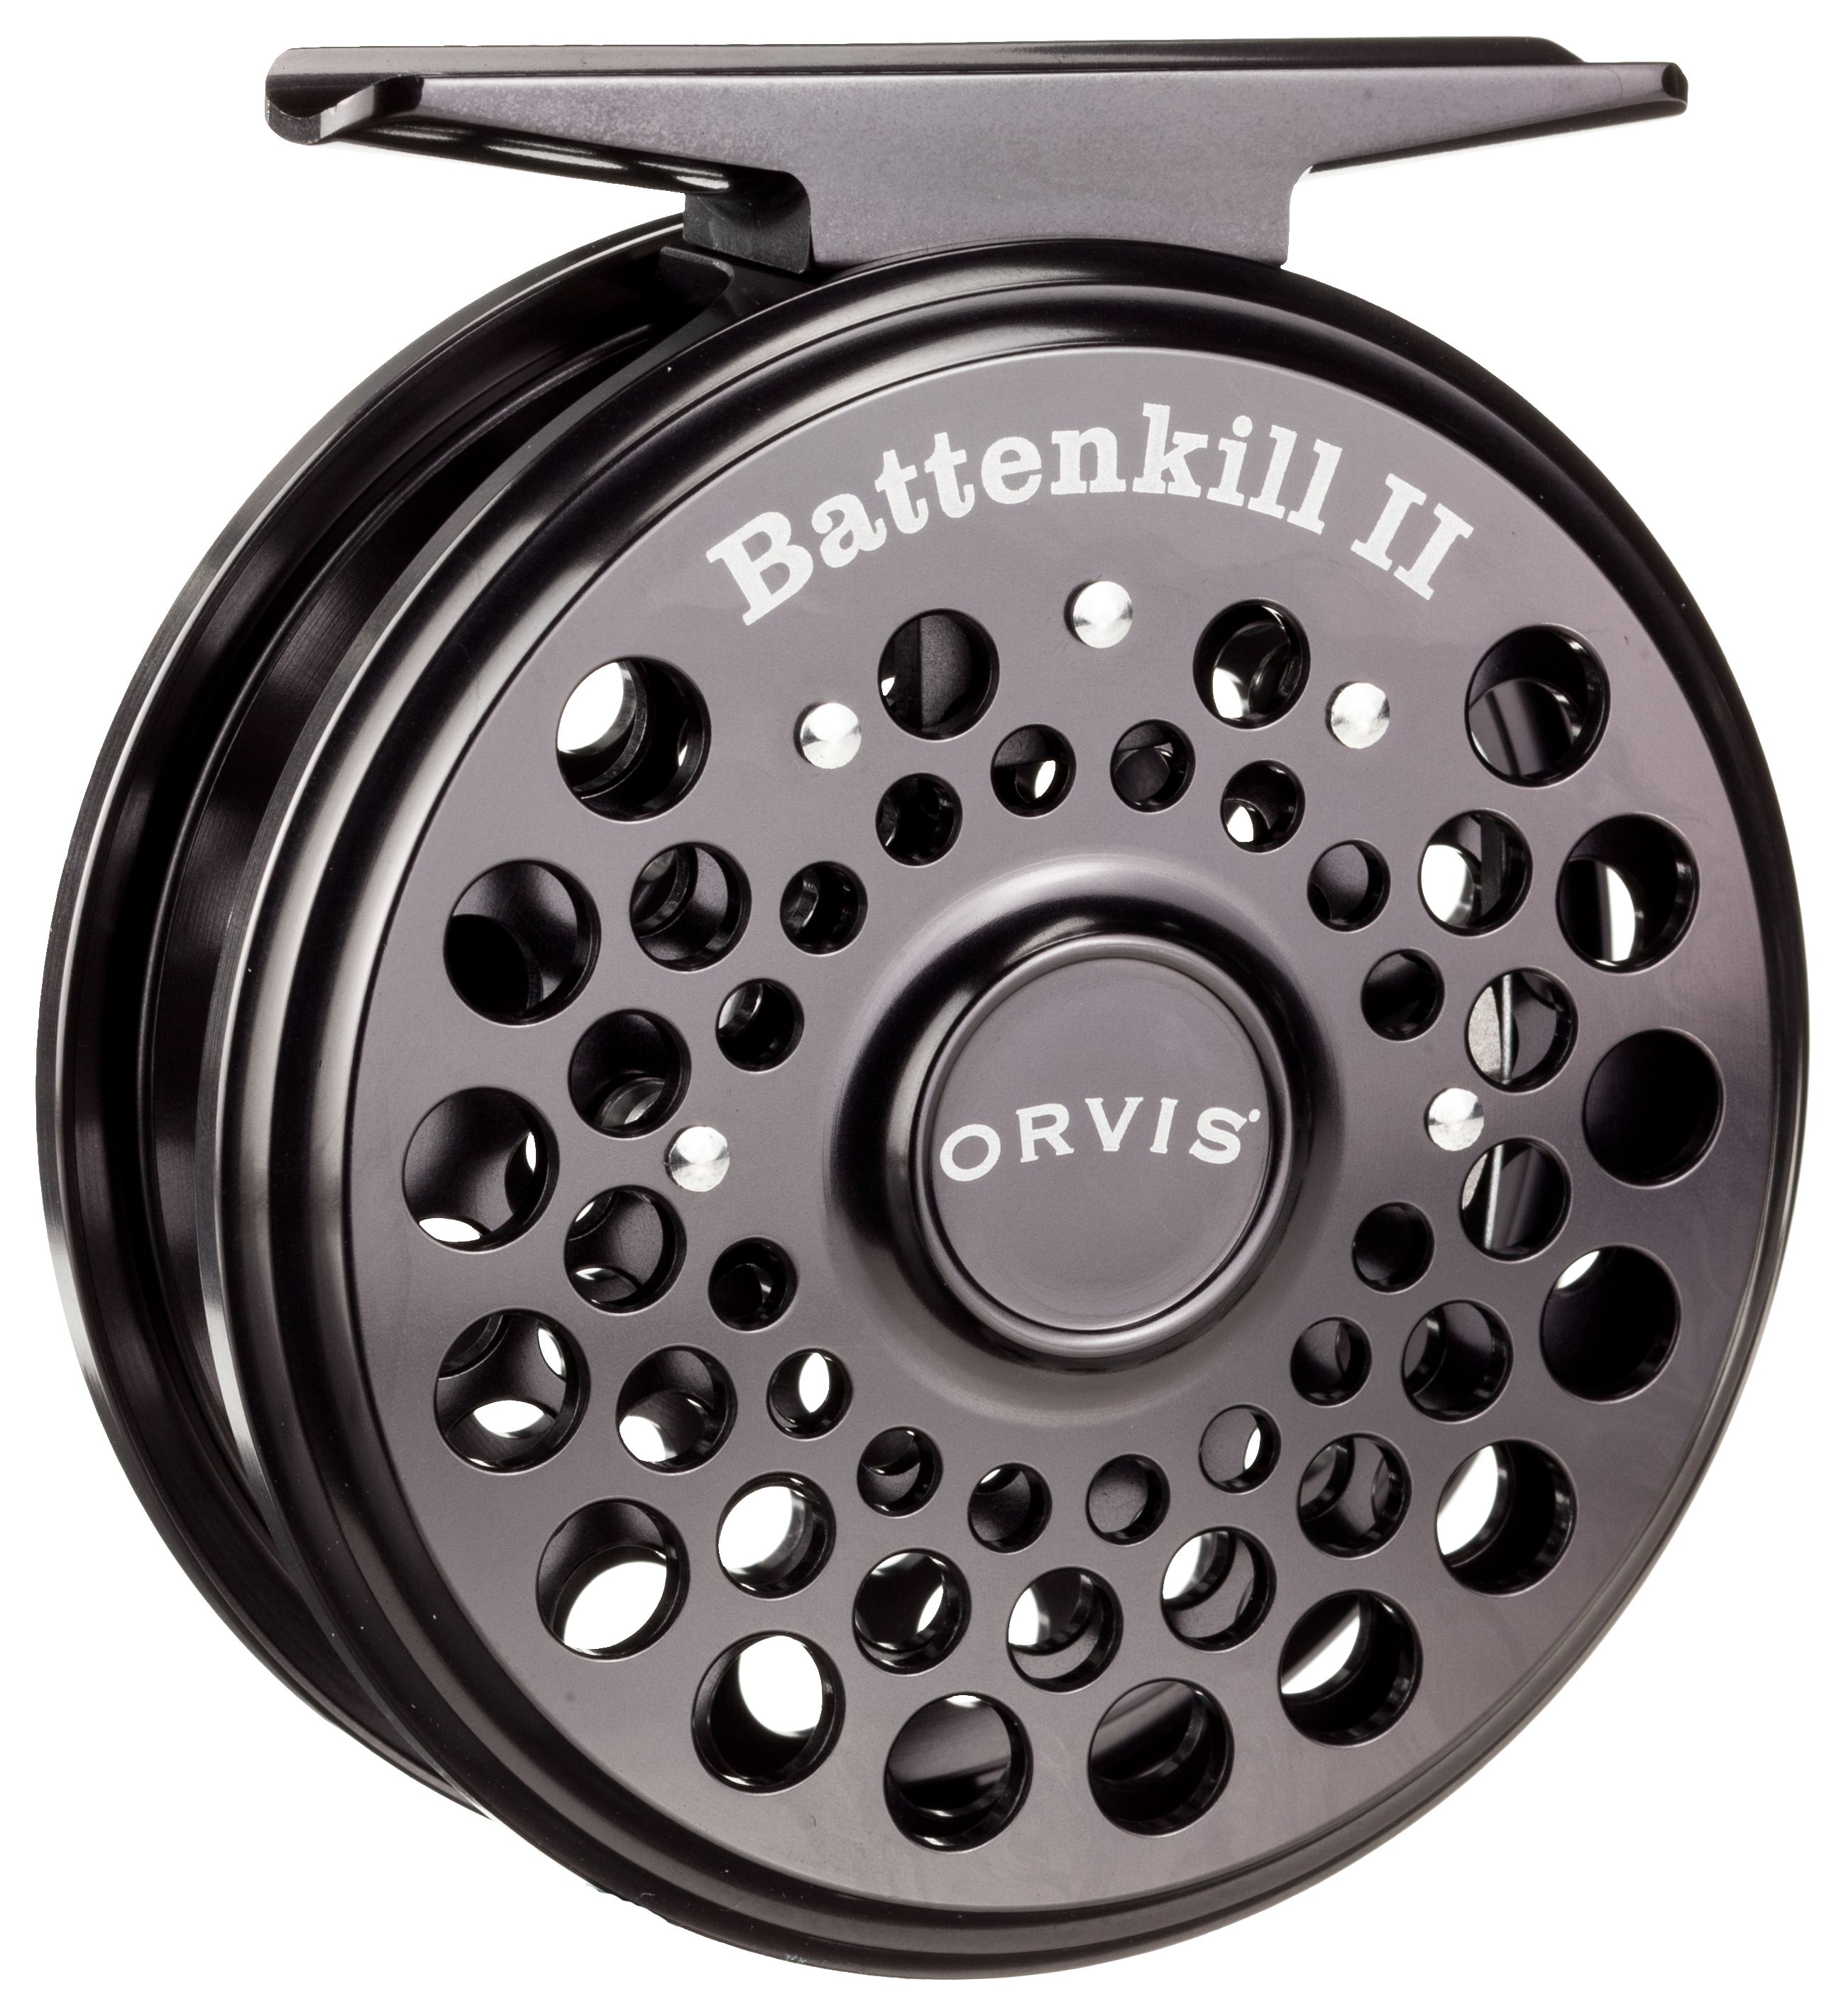 The Orvis Battenkill – CLICK / PAWL